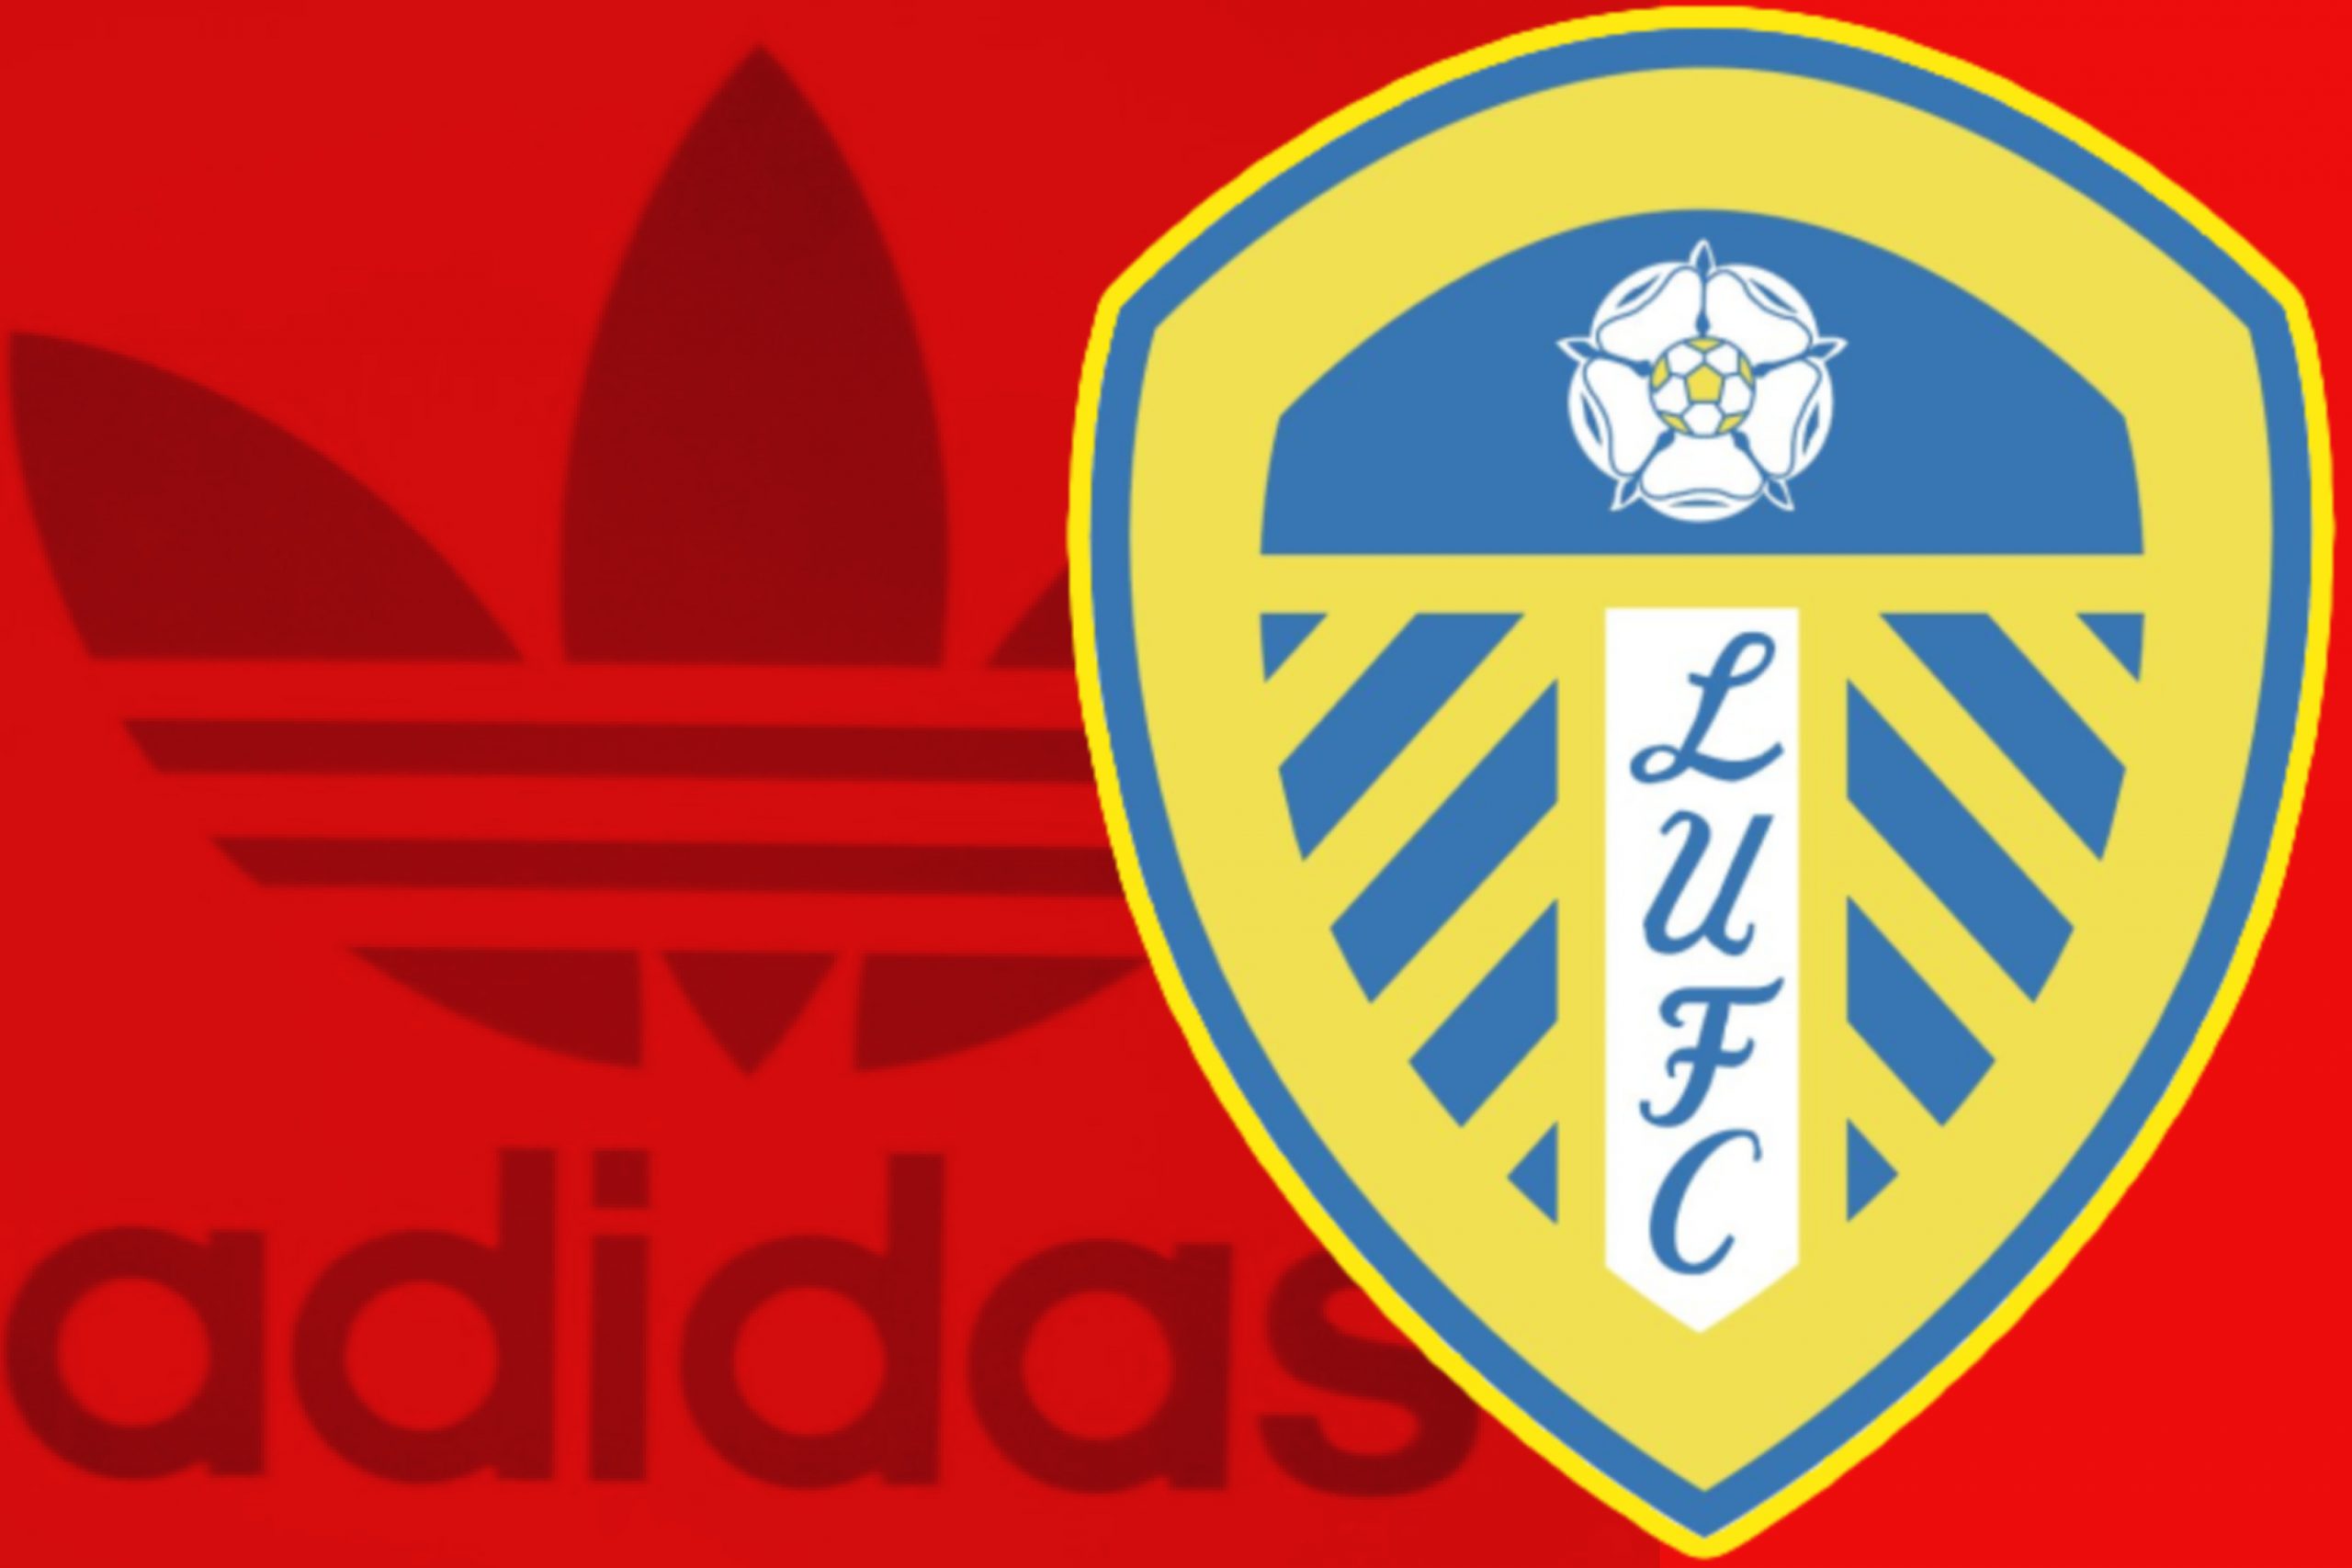 There’s a red top doing the rounds as Leeds United’s third kit for 20/21 season